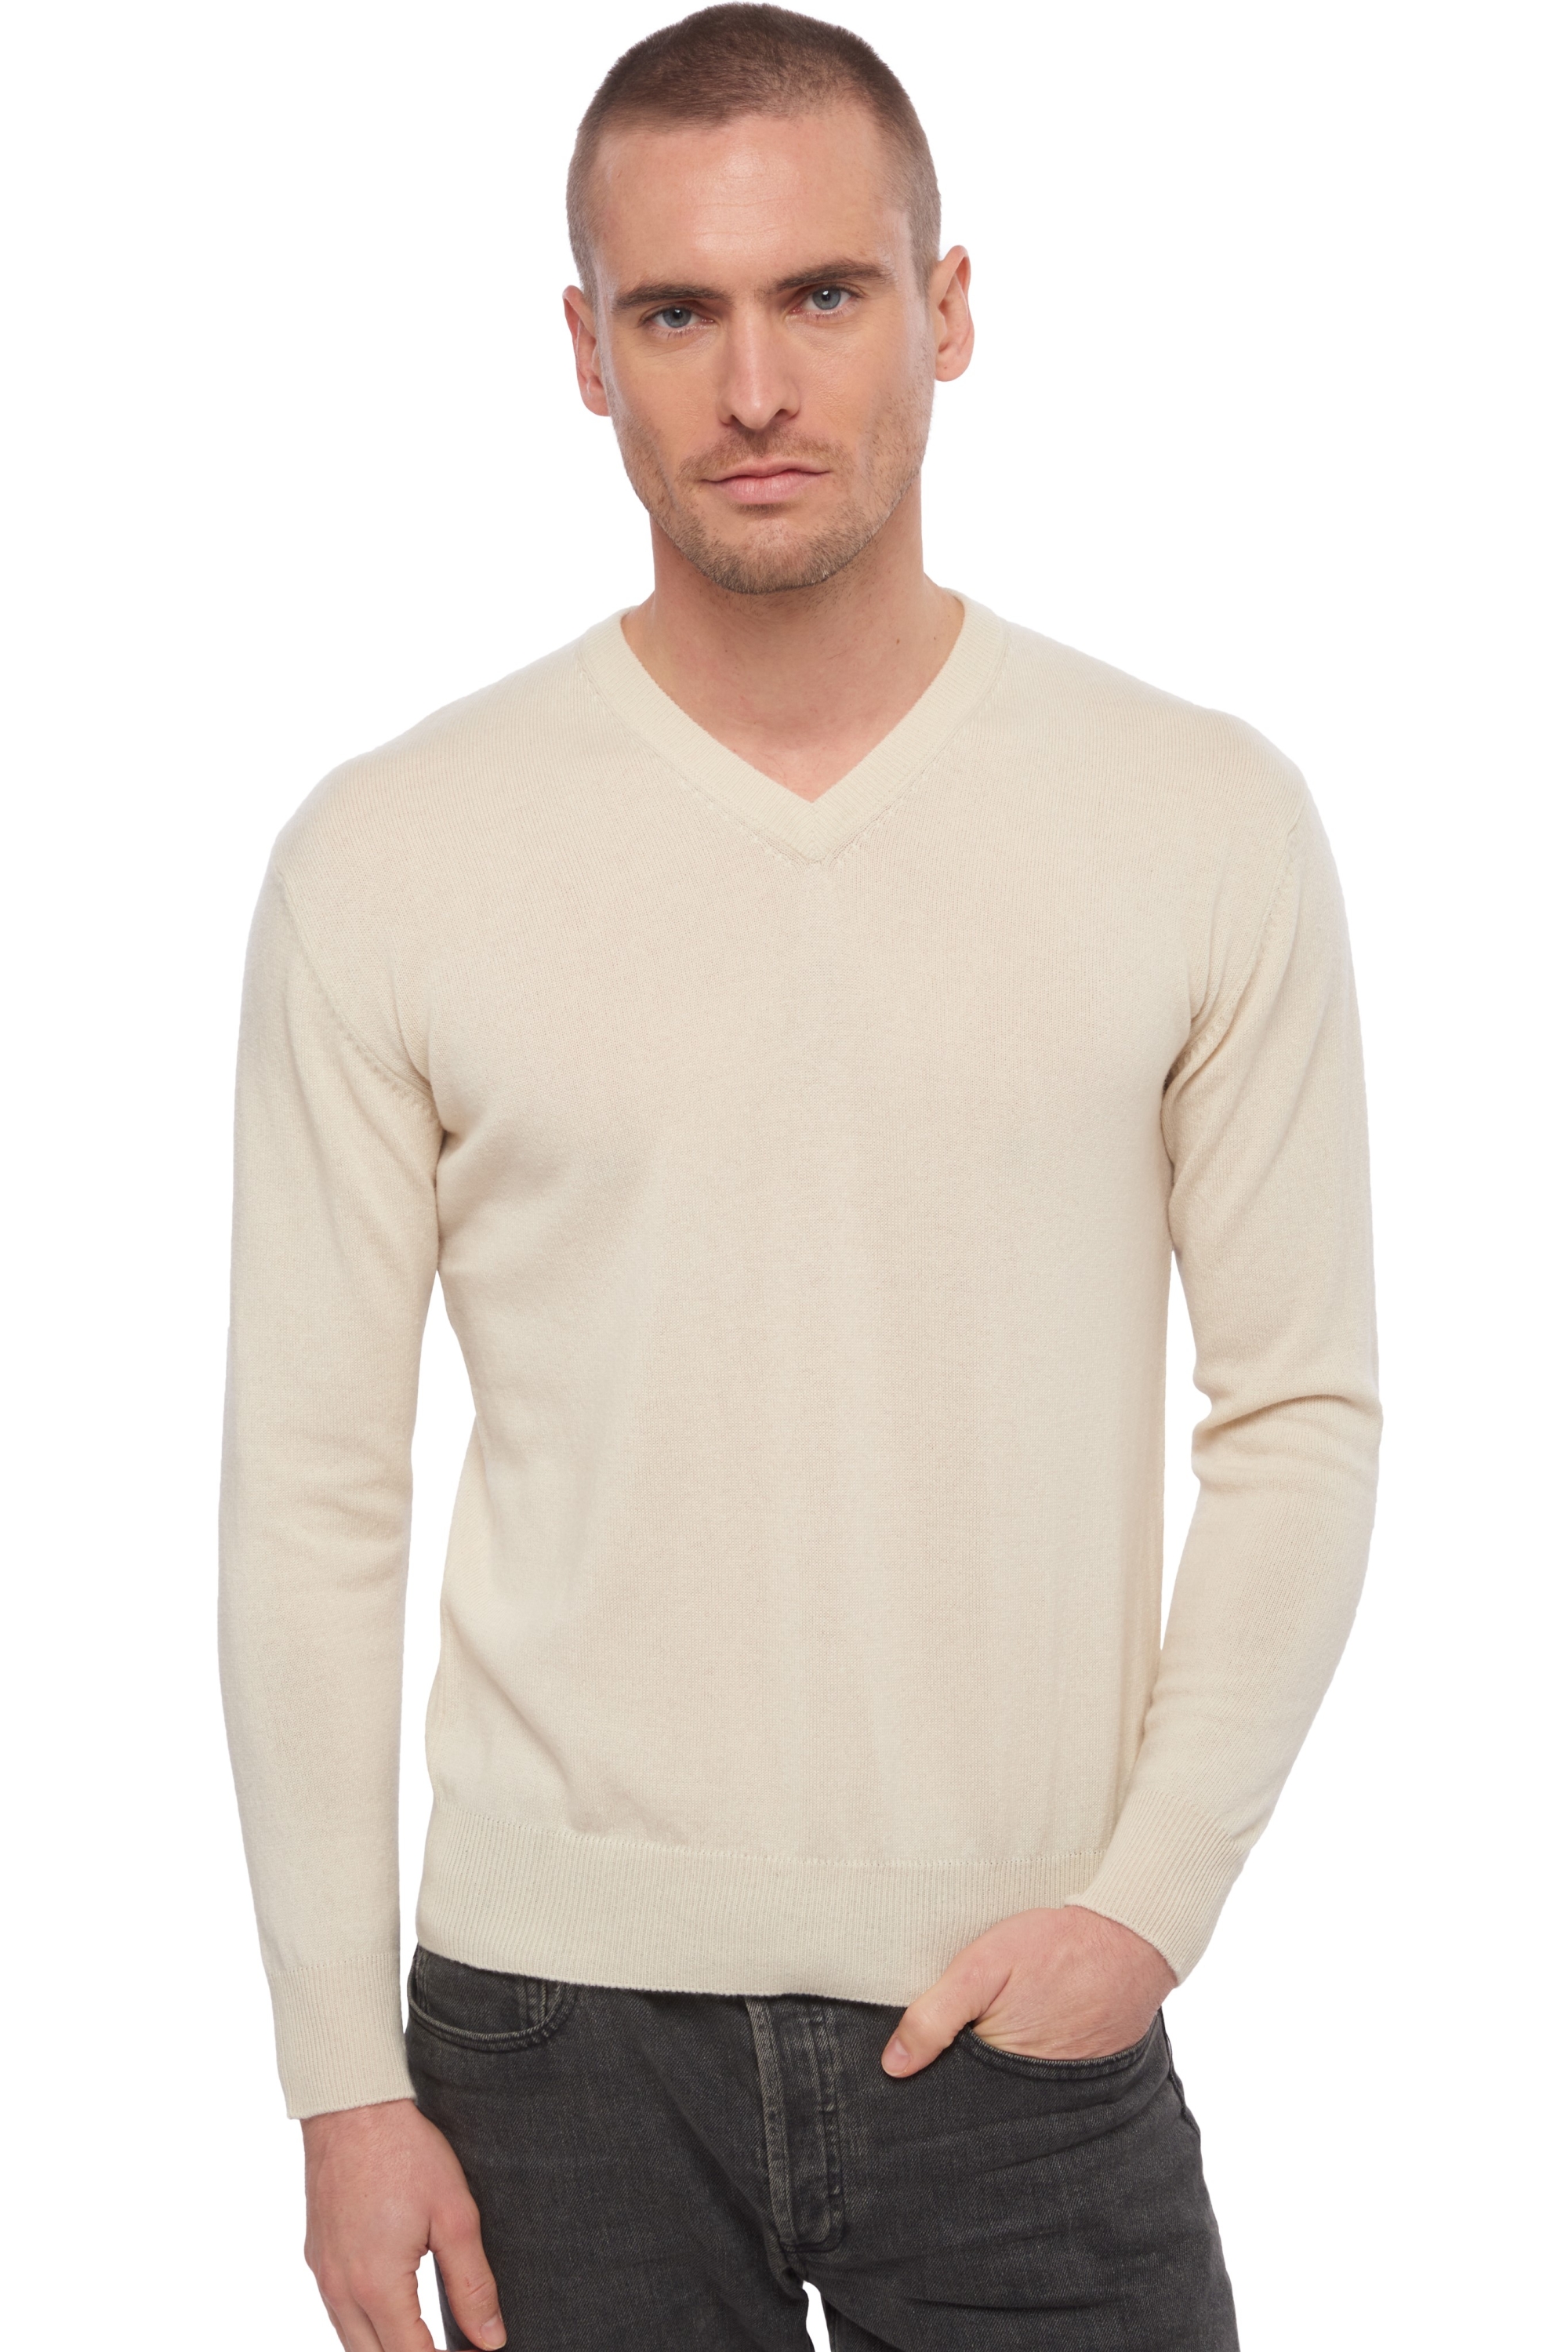 Cachemire pull homme hippolyte natural ecru 4xl